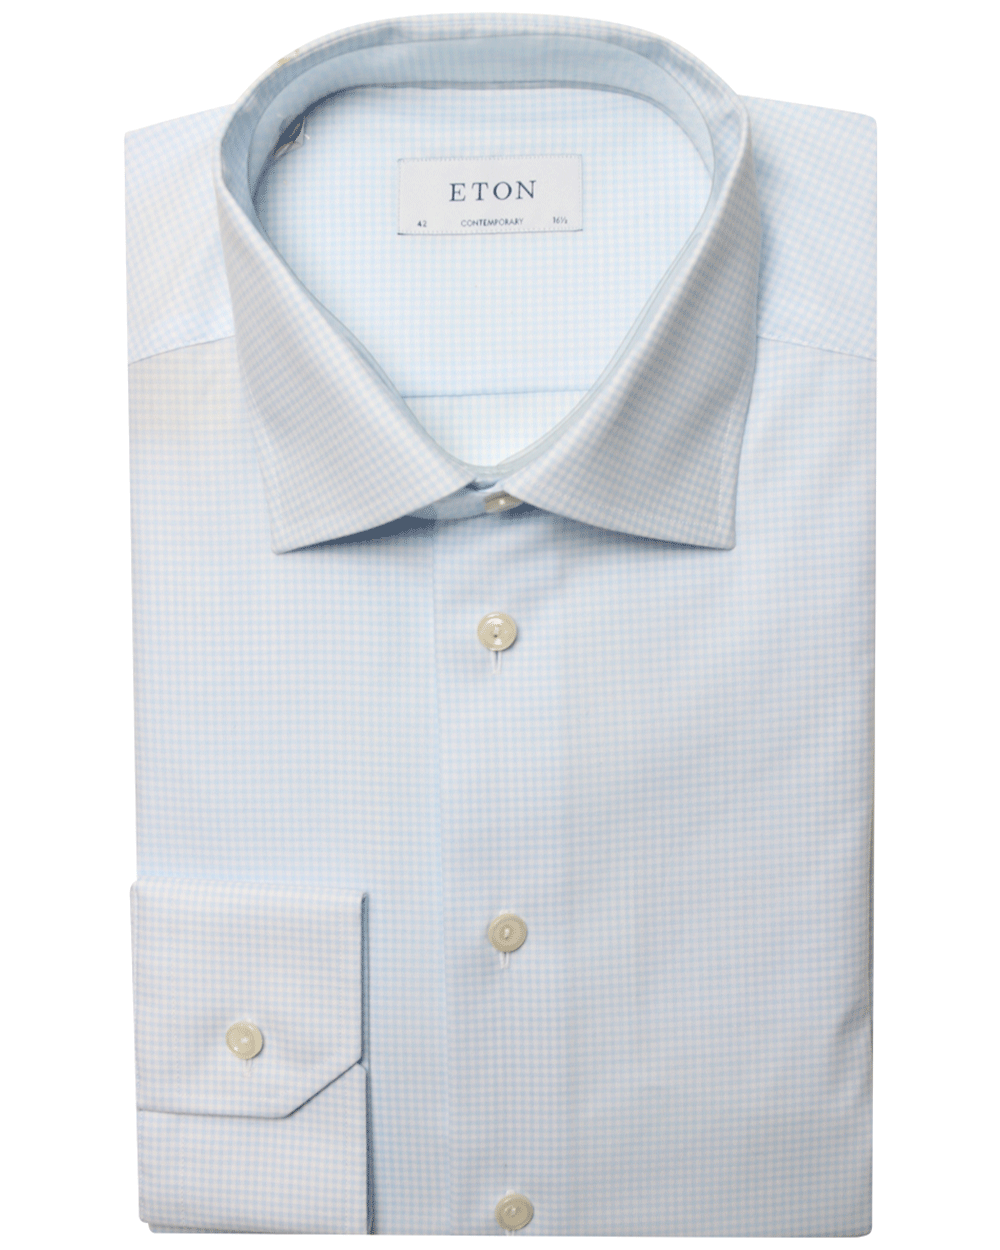 Light Blue and White Micro Checked Cotton Dress Shirt